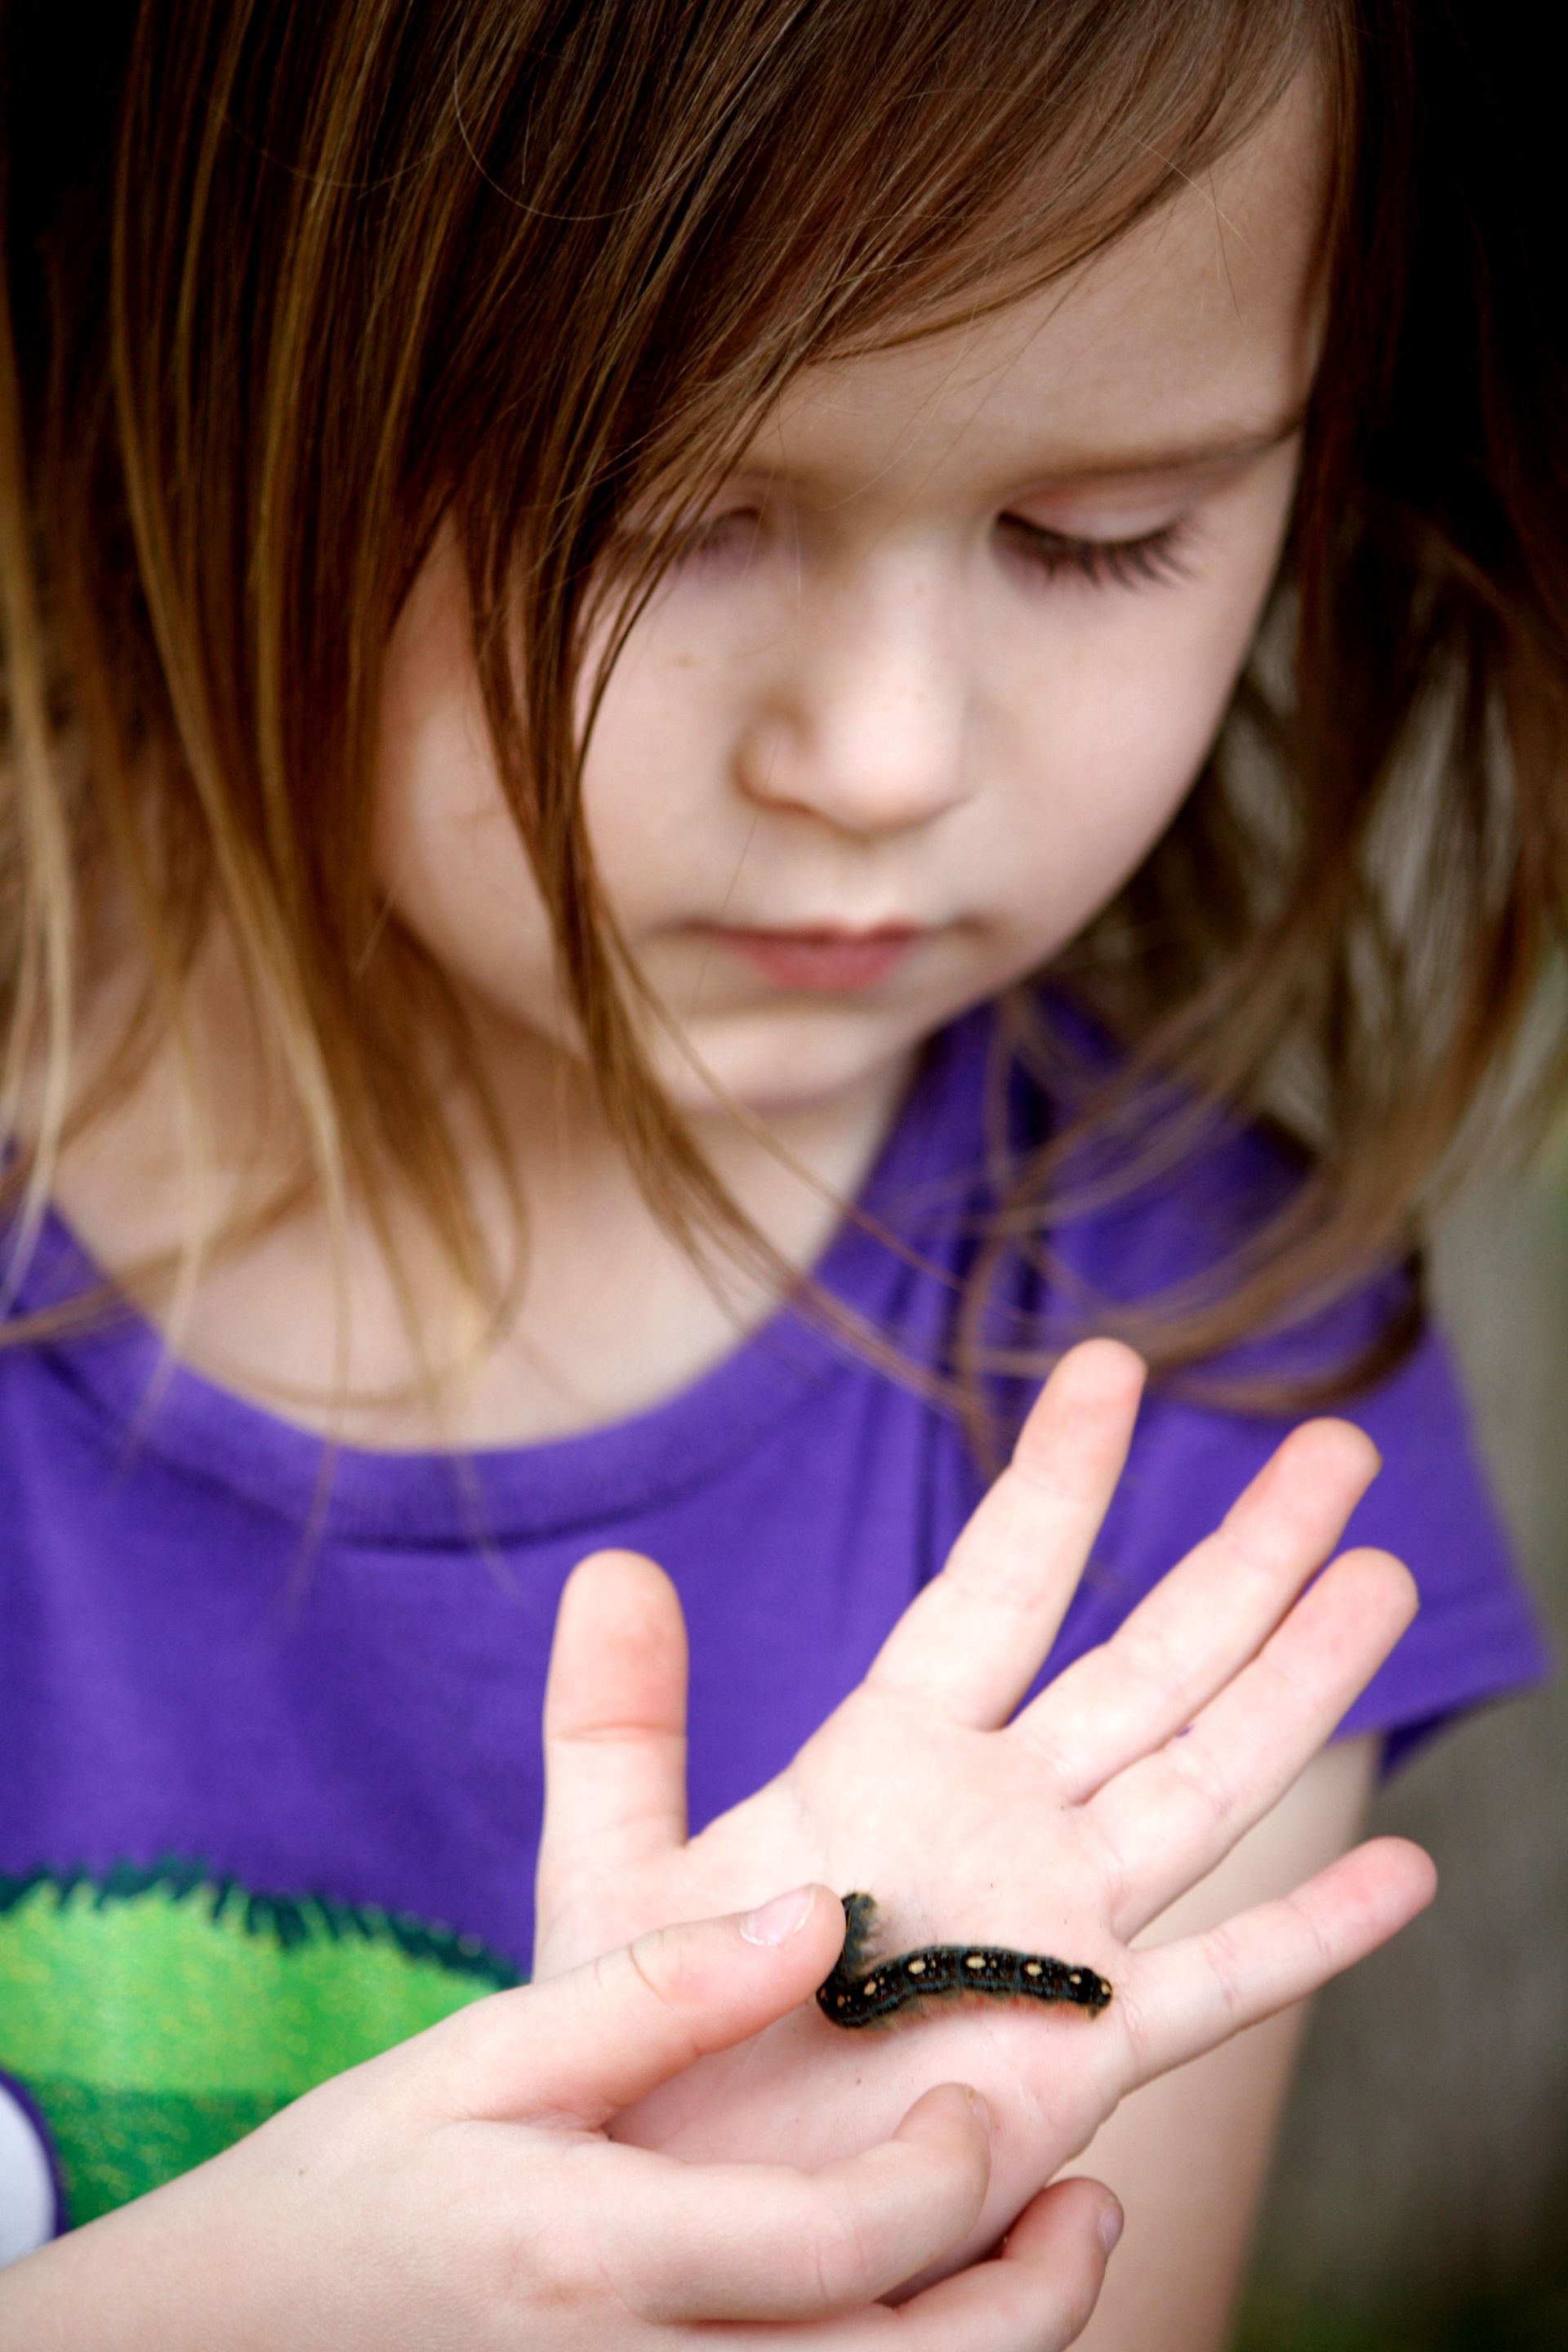 A young girl holds a caterpillar in her hand.